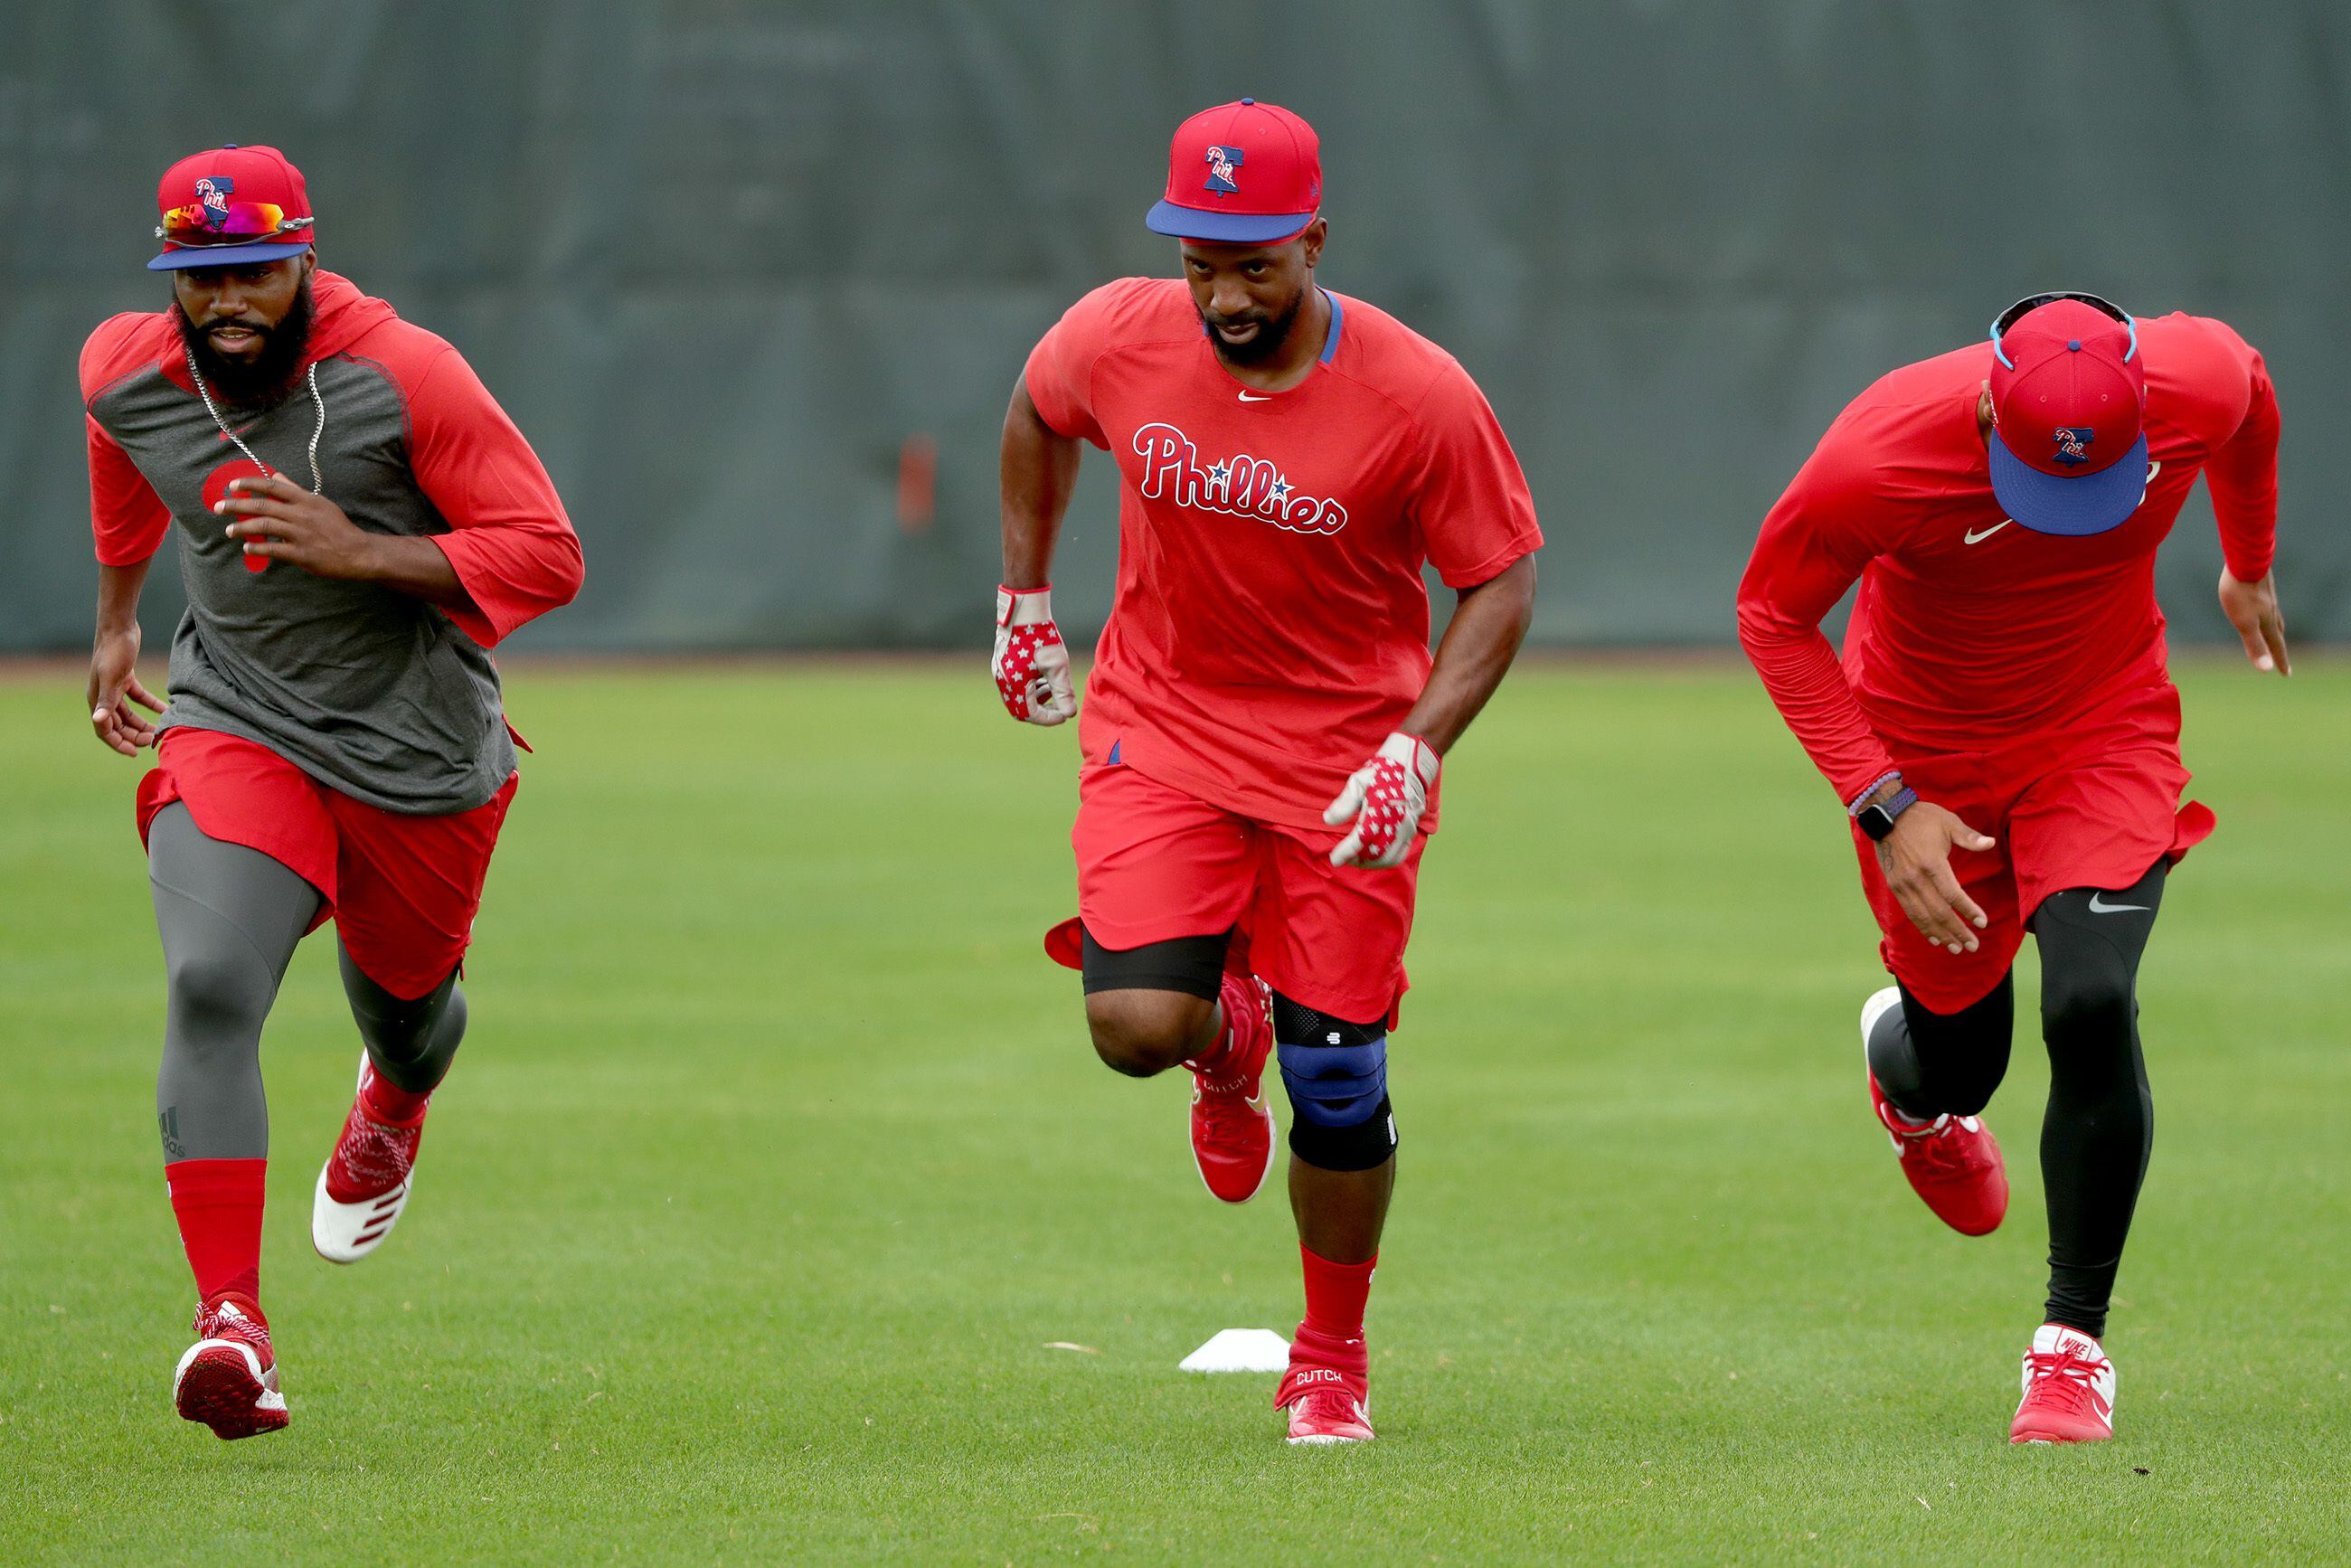 Phillies' Andrew McCutchen confident he'll be ready for opening